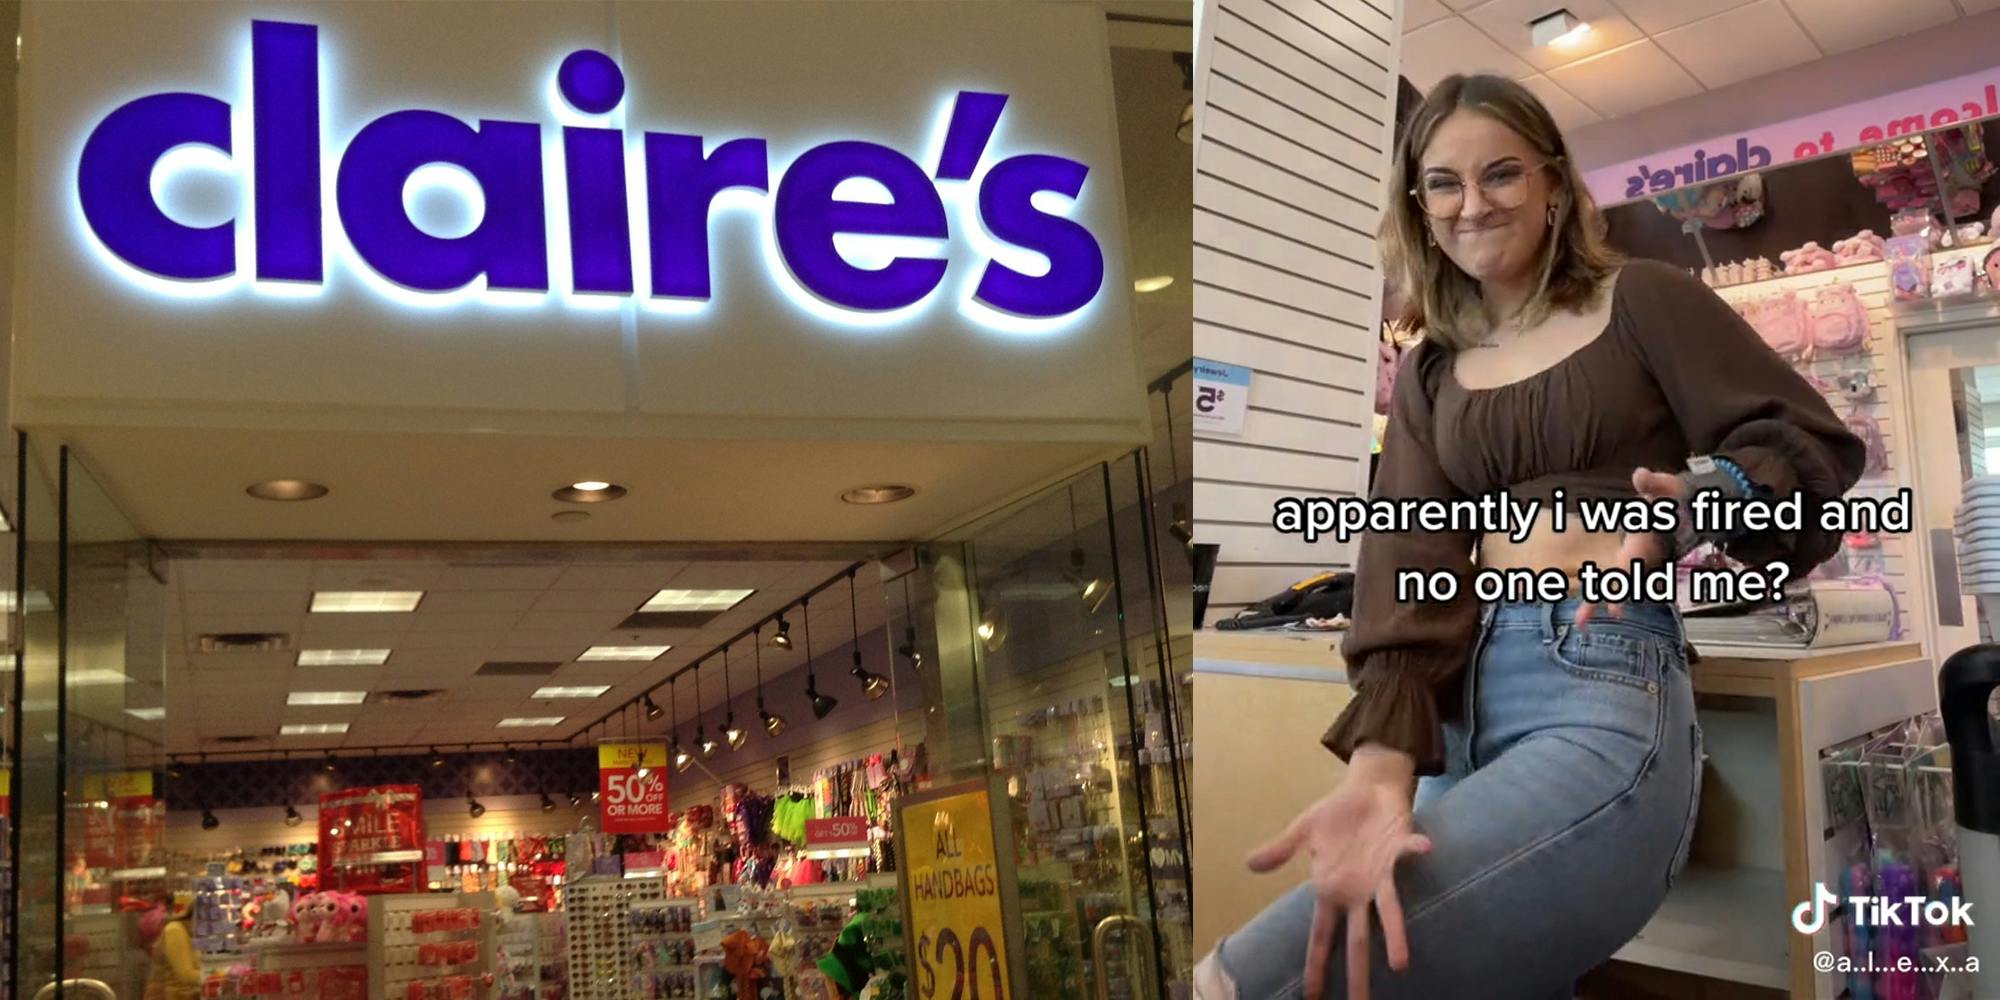 I work at Claire's - people always slam our piercings but the